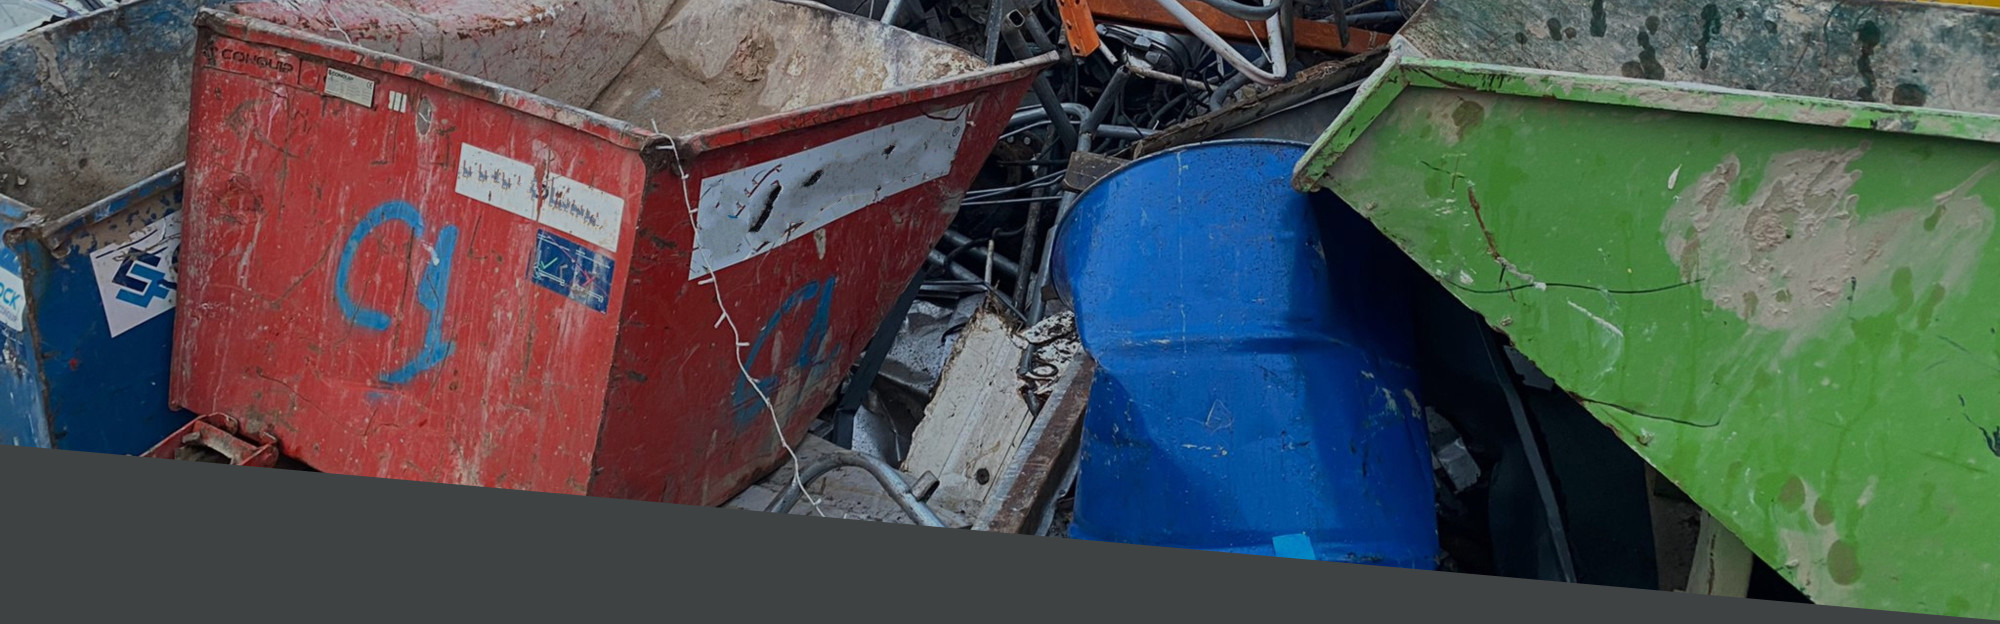 Artemes Waste Solutions - Scrap and Metal Recycling